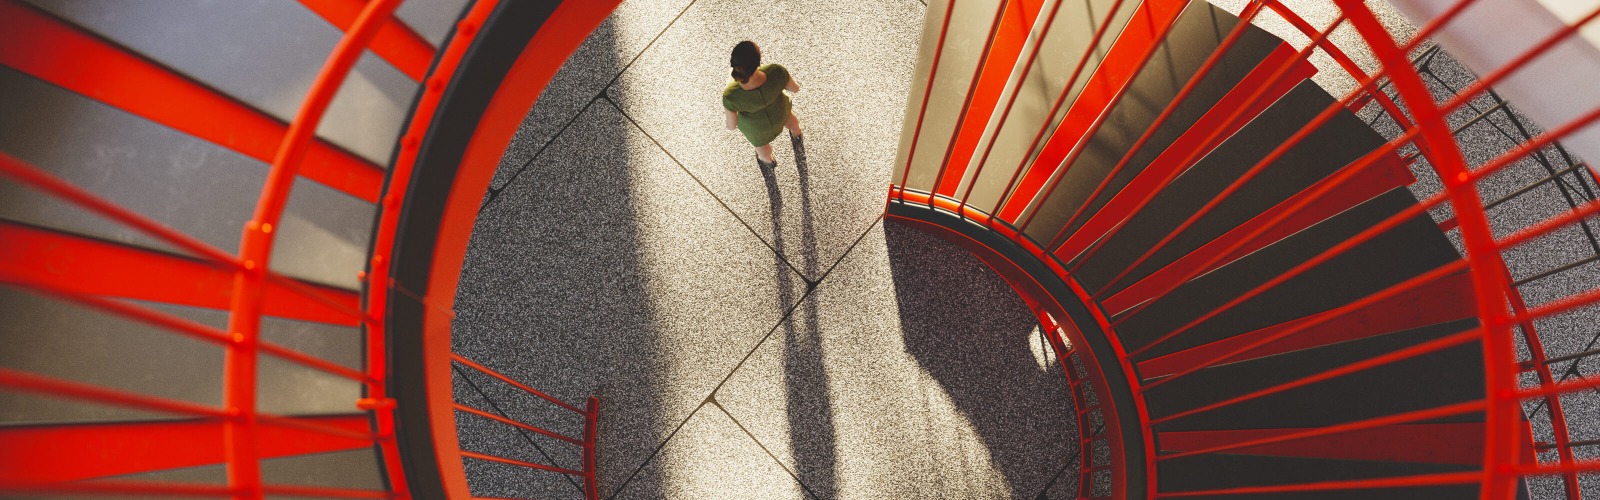 Person at the bottom of a red spiral staircase